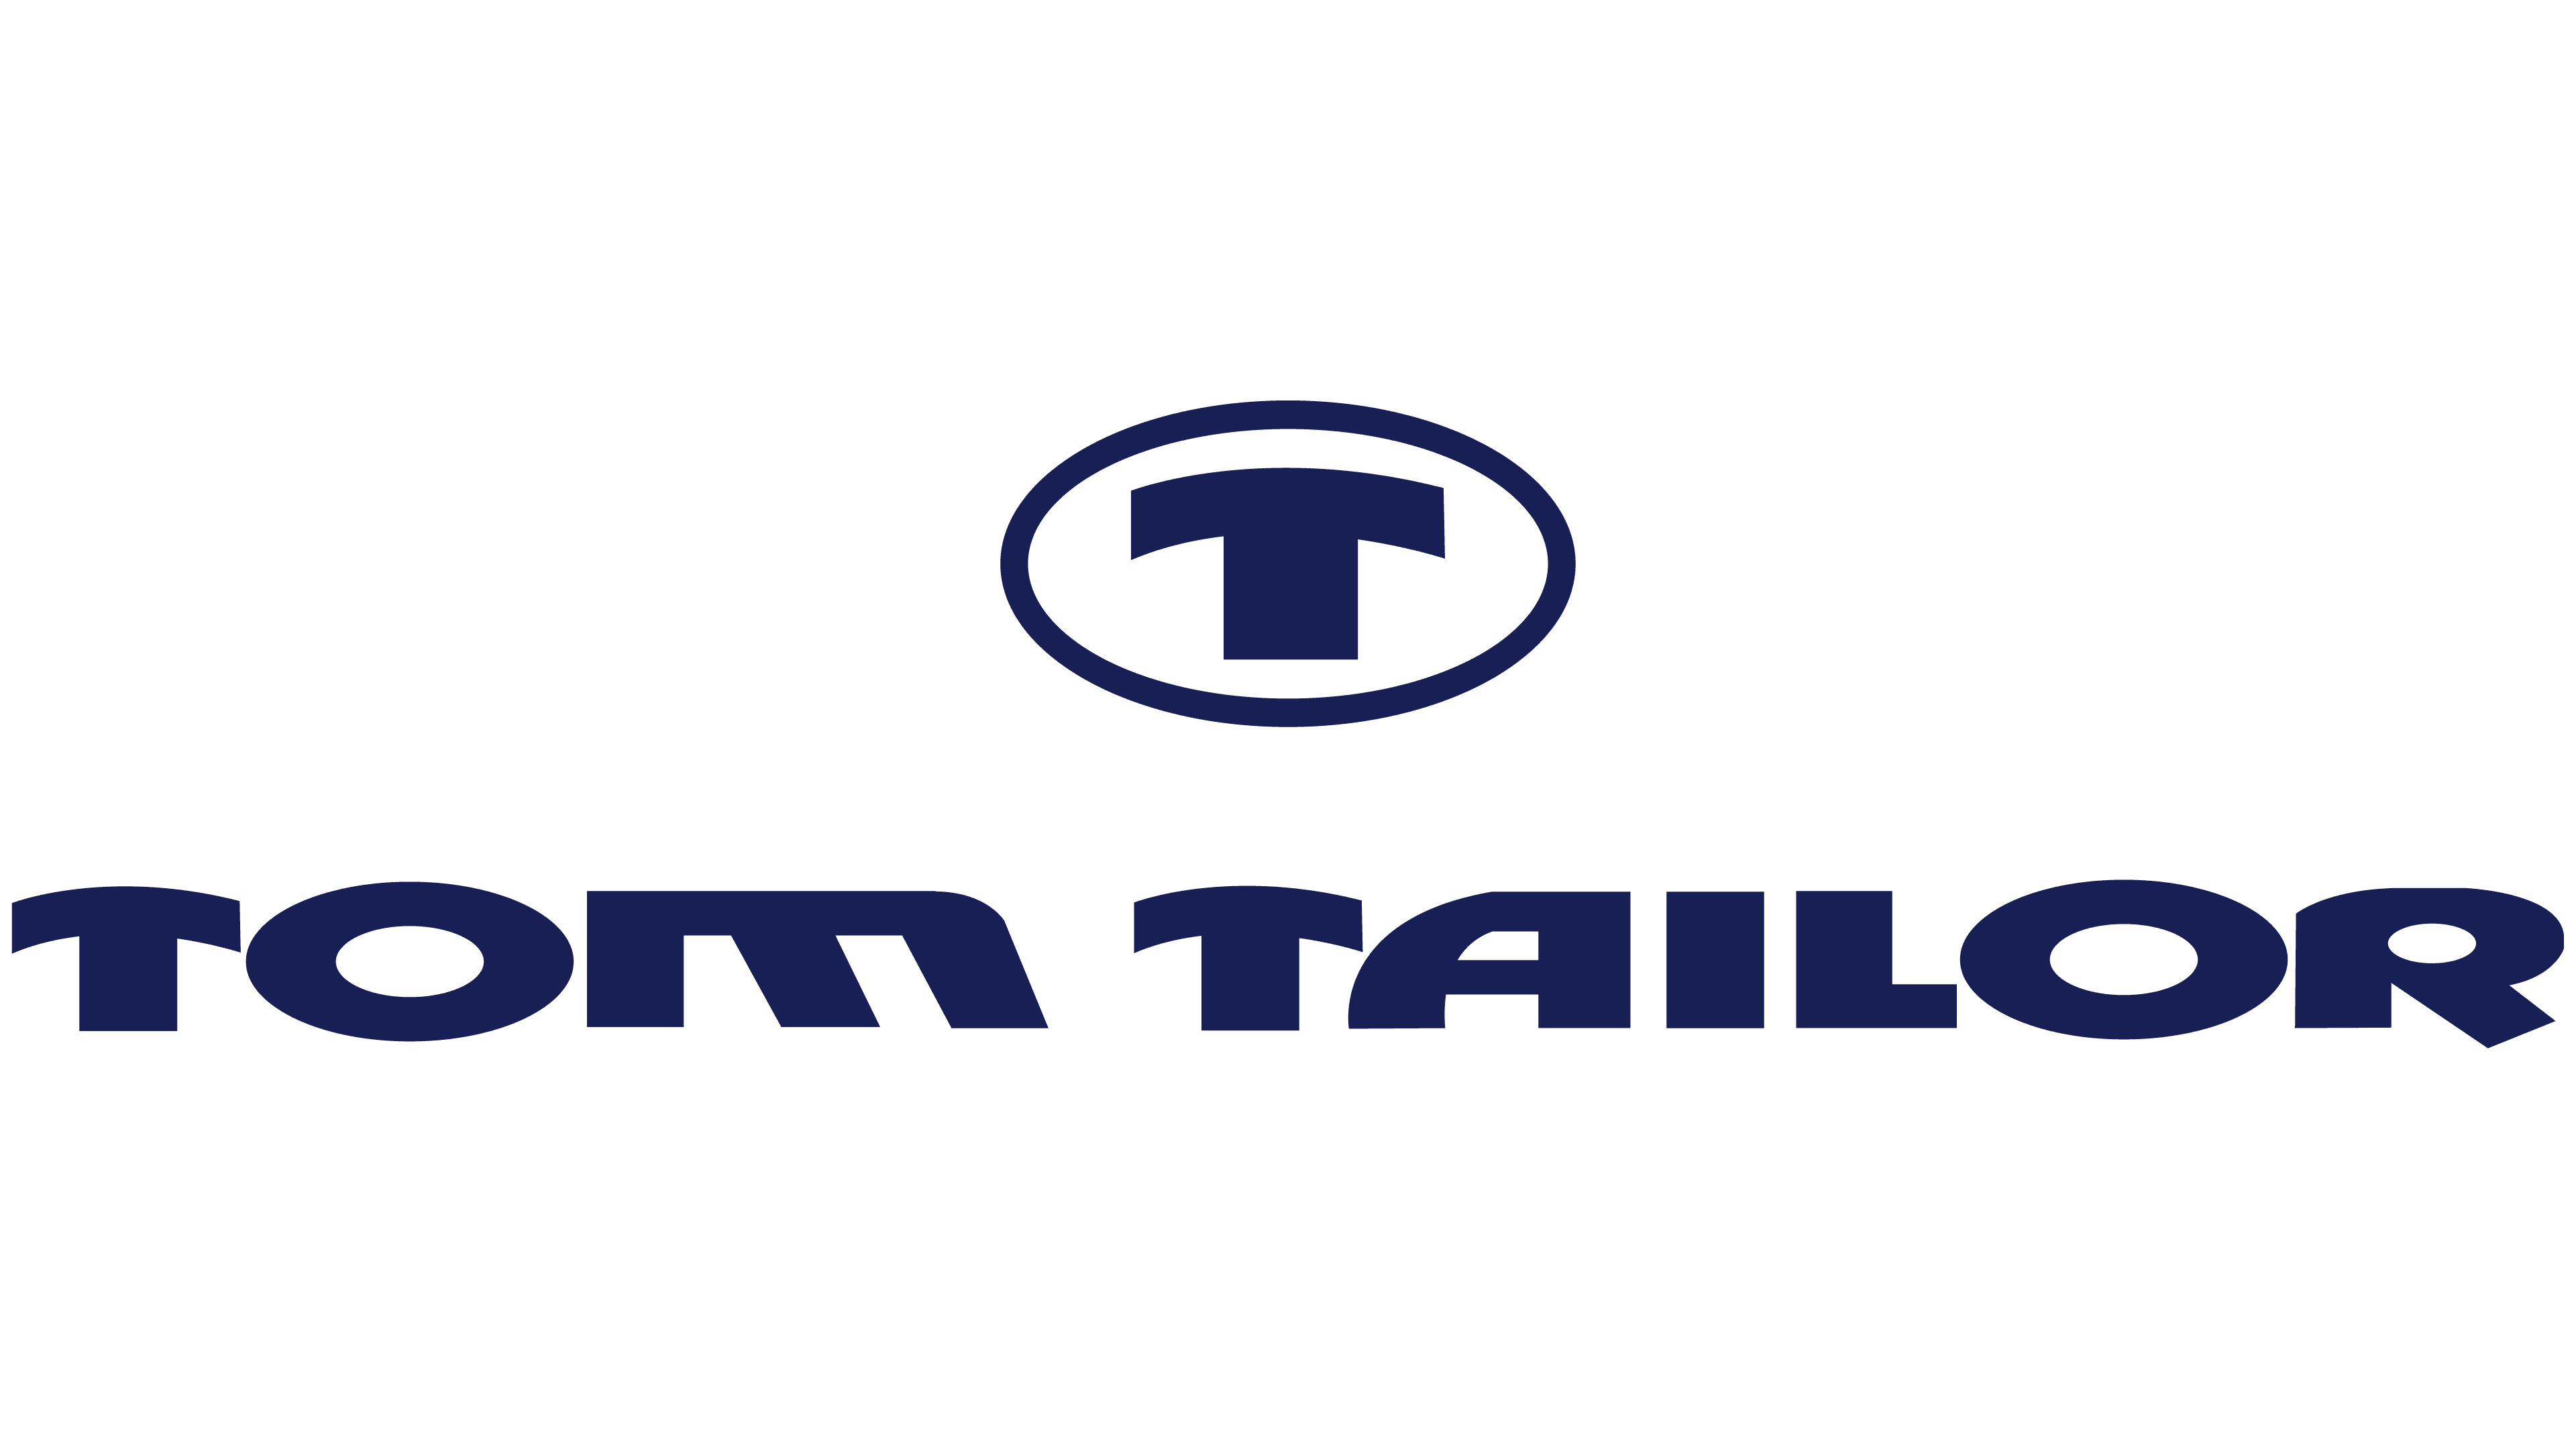 history, Tom brand symbol, Tailor Logo and meaning, PNG,